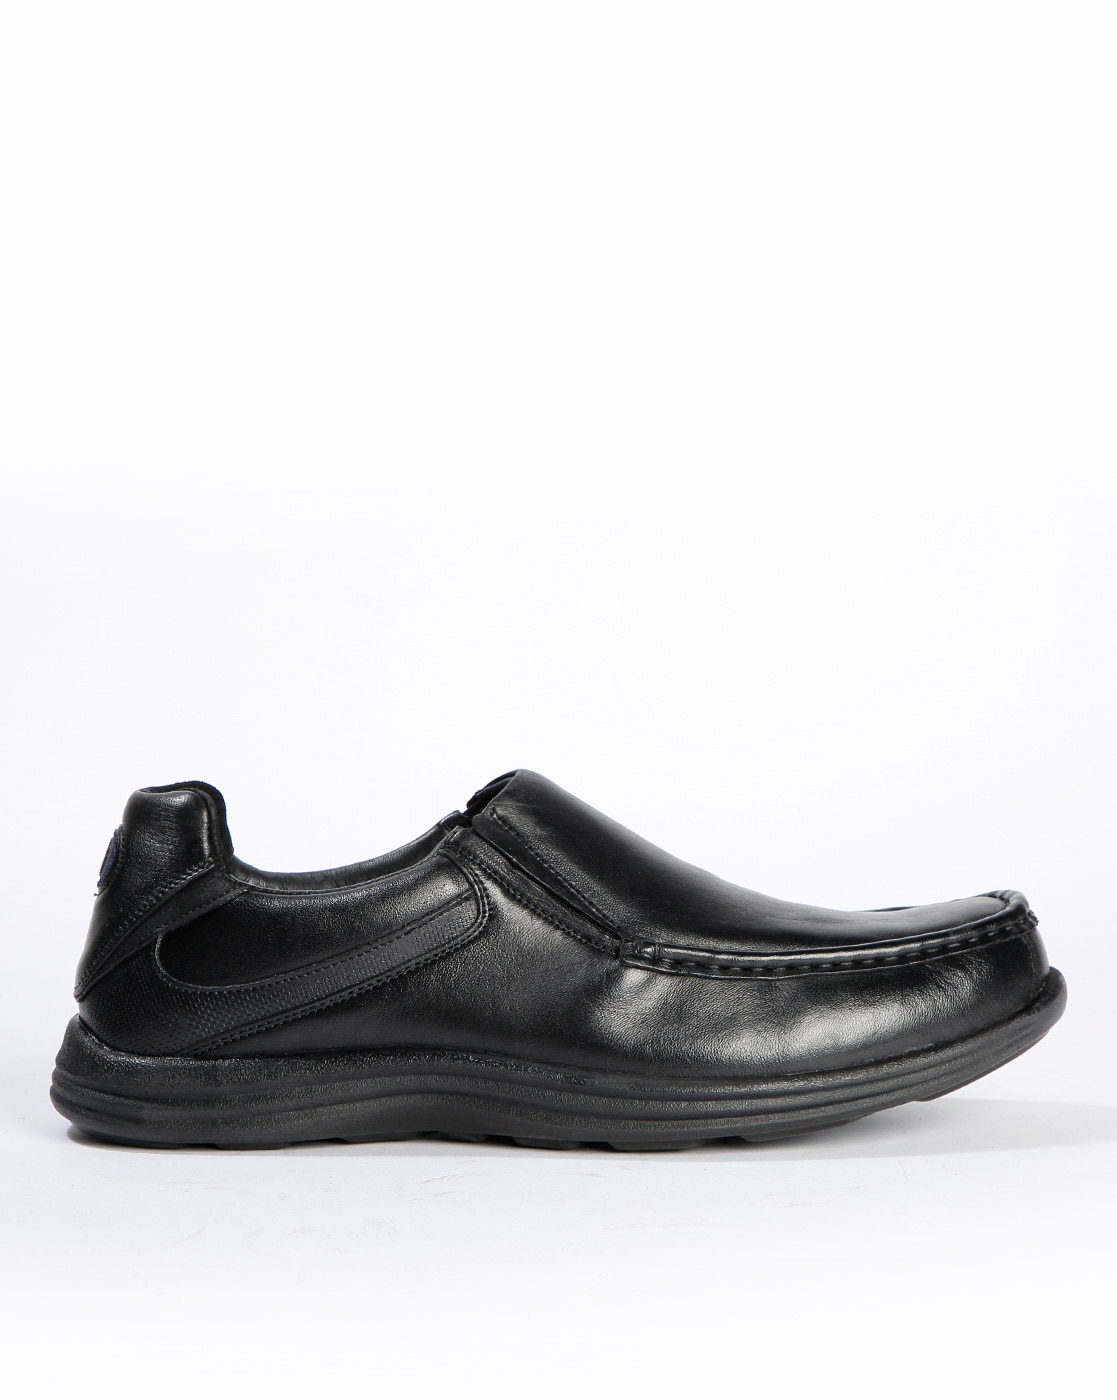 hush puppy formal shoes